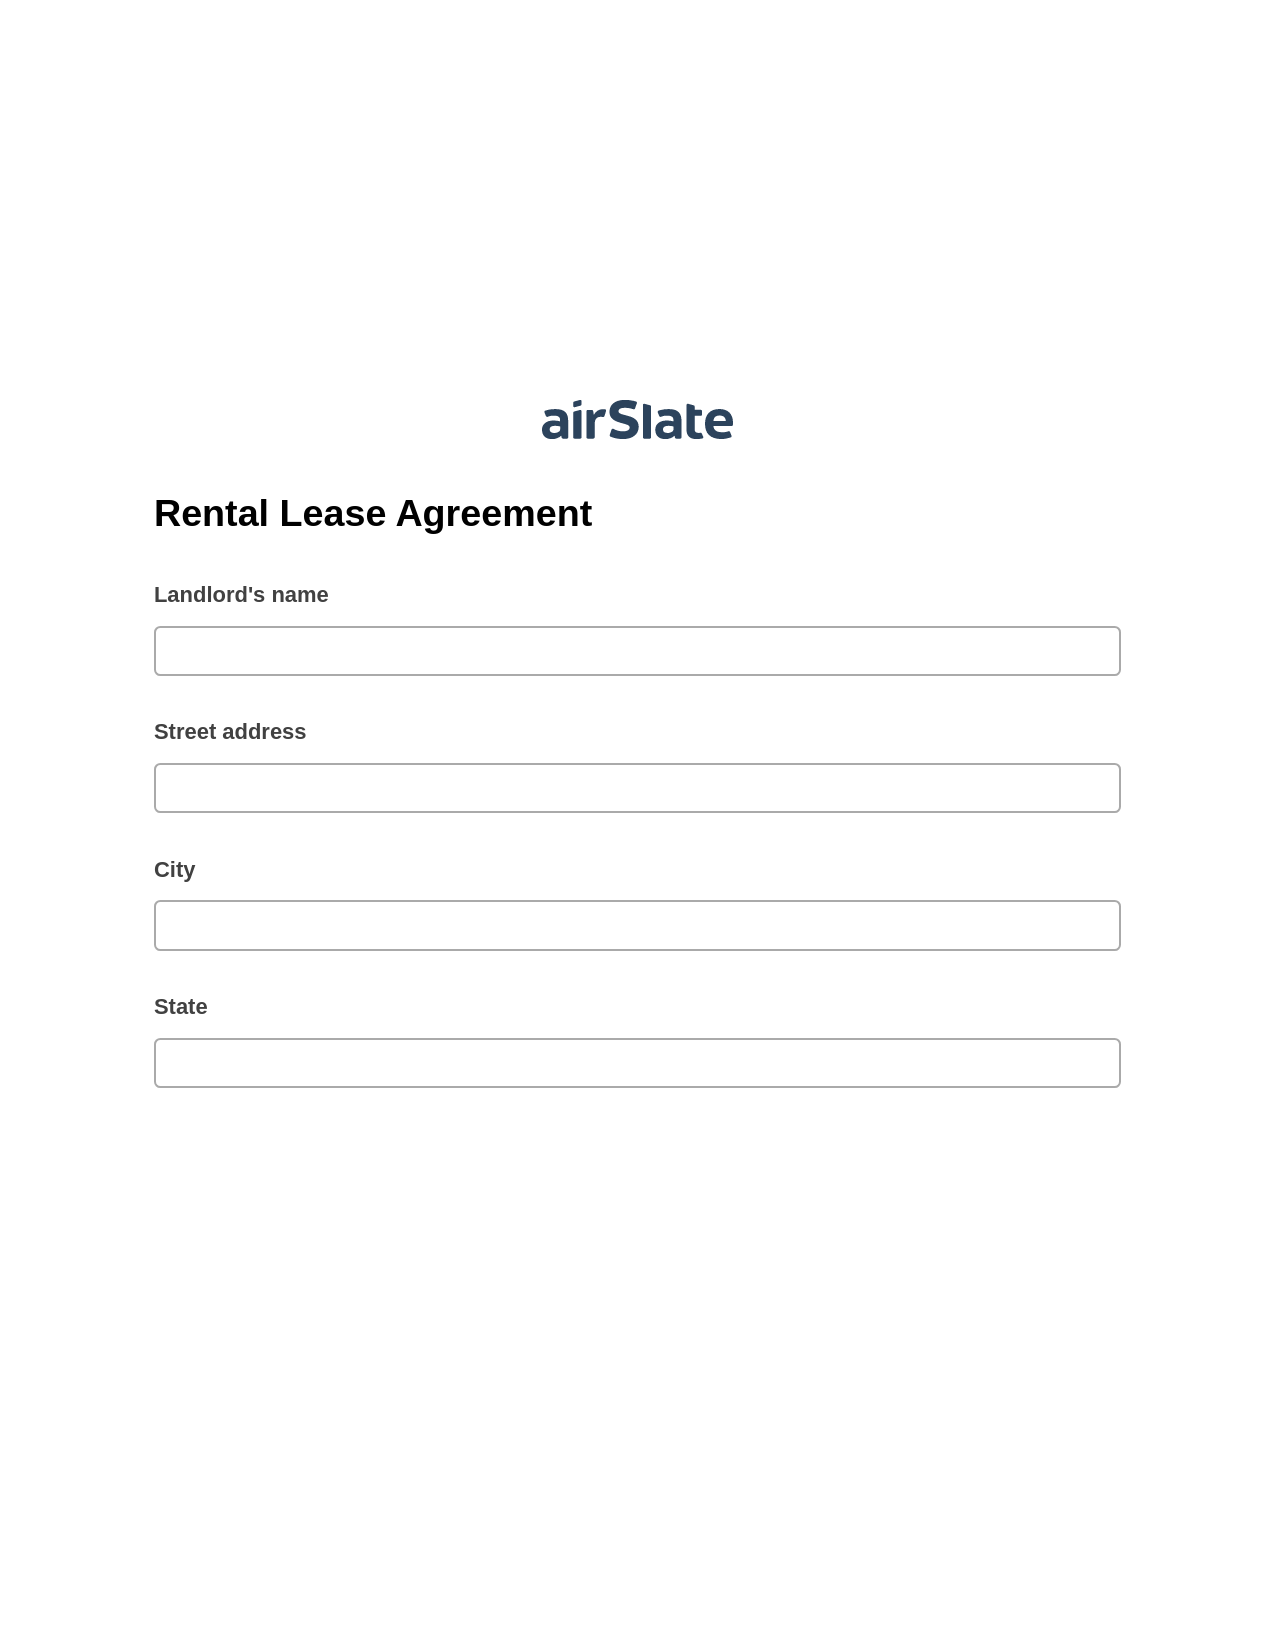 Rental Lease Agreement Pre-fill Document Bot, Revoke Access Bot, Export to Excel 365 Bot